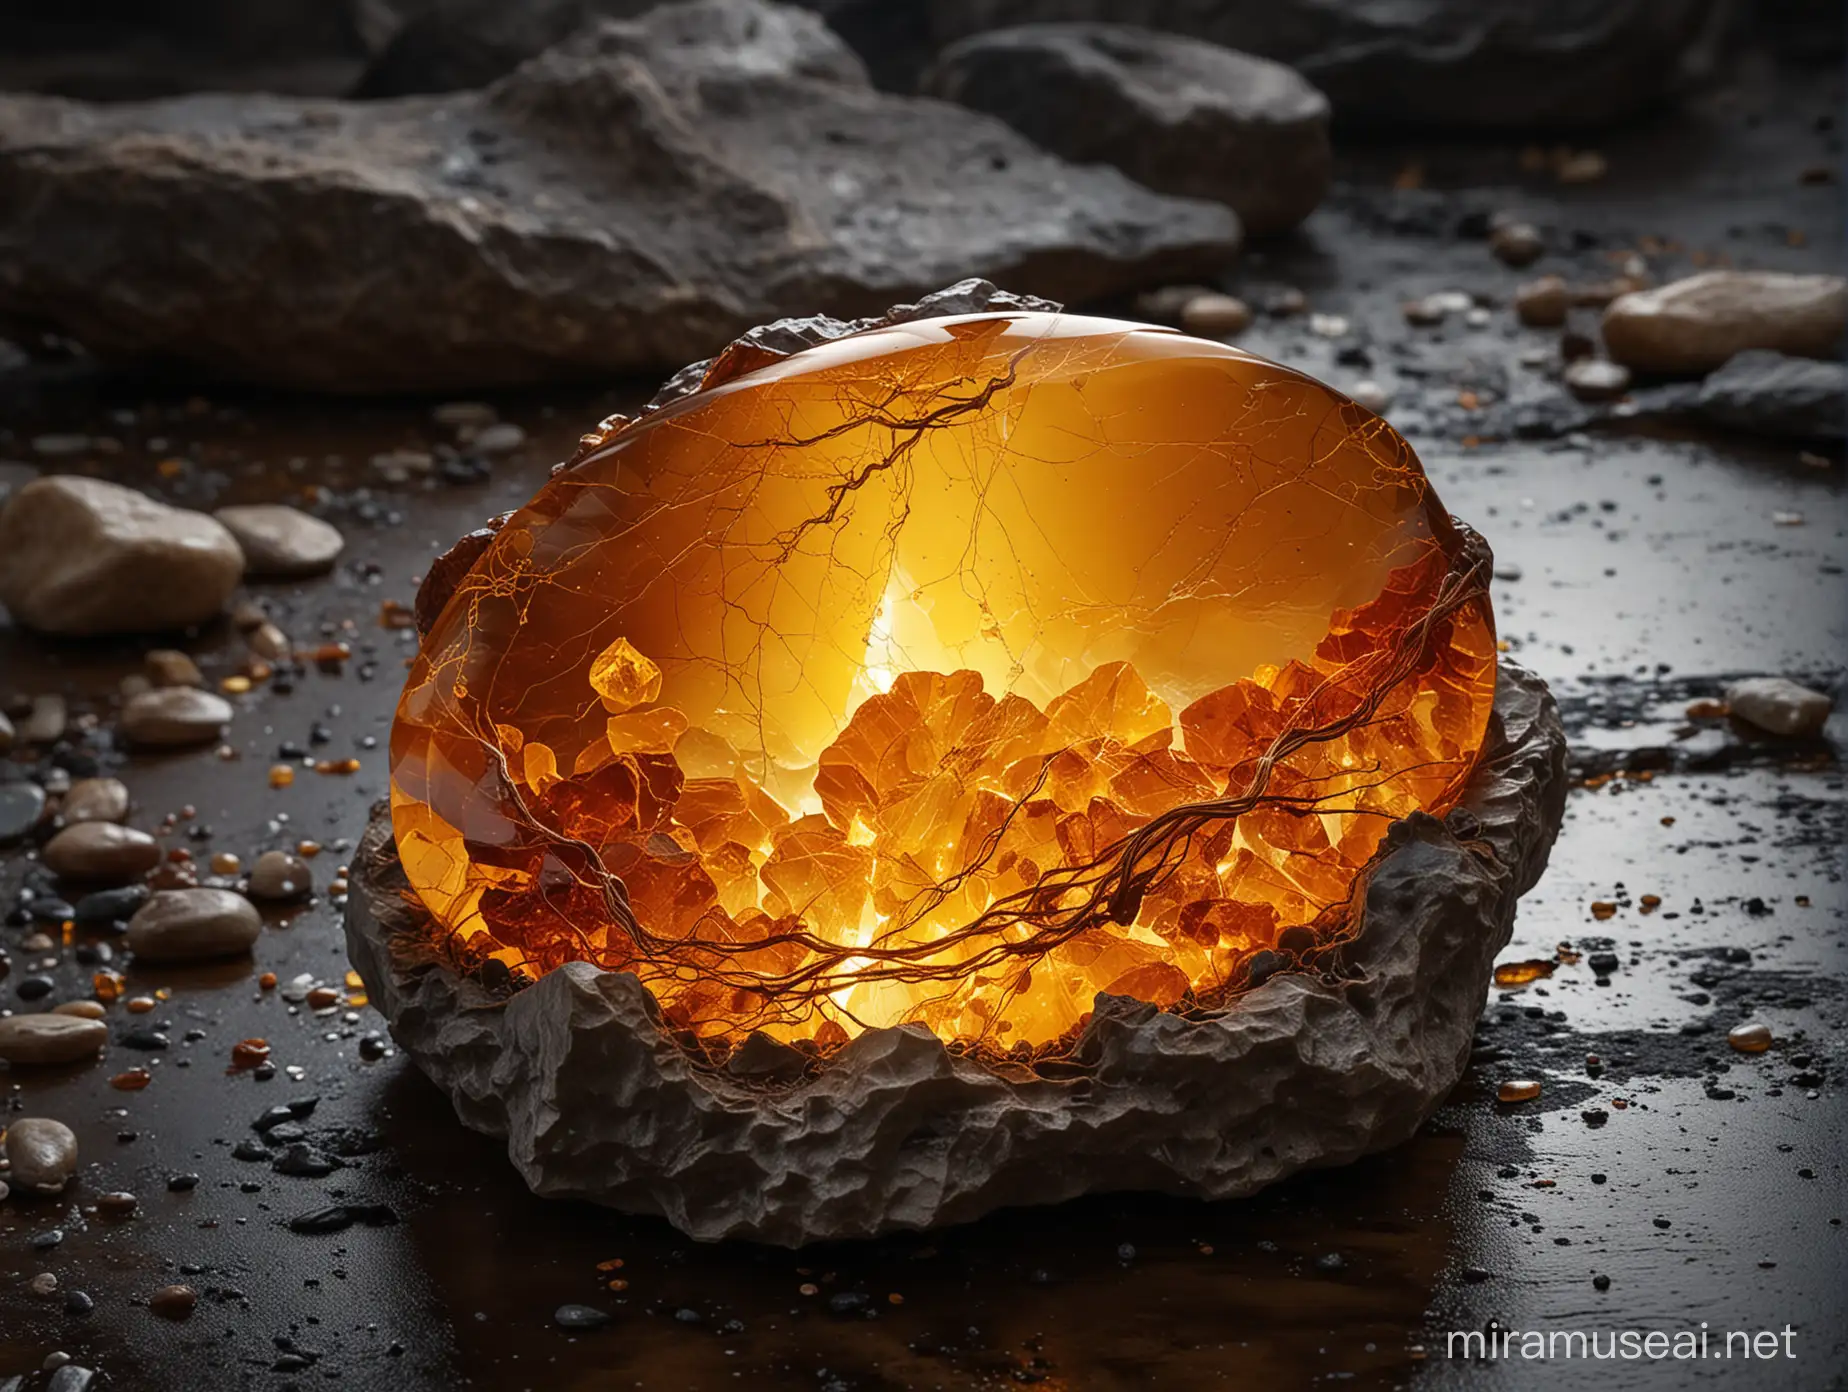 "In this breathtaking image, a large piece of amber sits on the ground, surrounded by a halo of electricity. As the lightning strikes the stone, the electricity is attracted to the amber, creating a beautiful and unique sight. The surroundings are rendered in exquisite detail, and the lighting is stunning. The entire scene is a true masterpiece of nature and artistry, filling the air with a spectacular show of power and beauty."